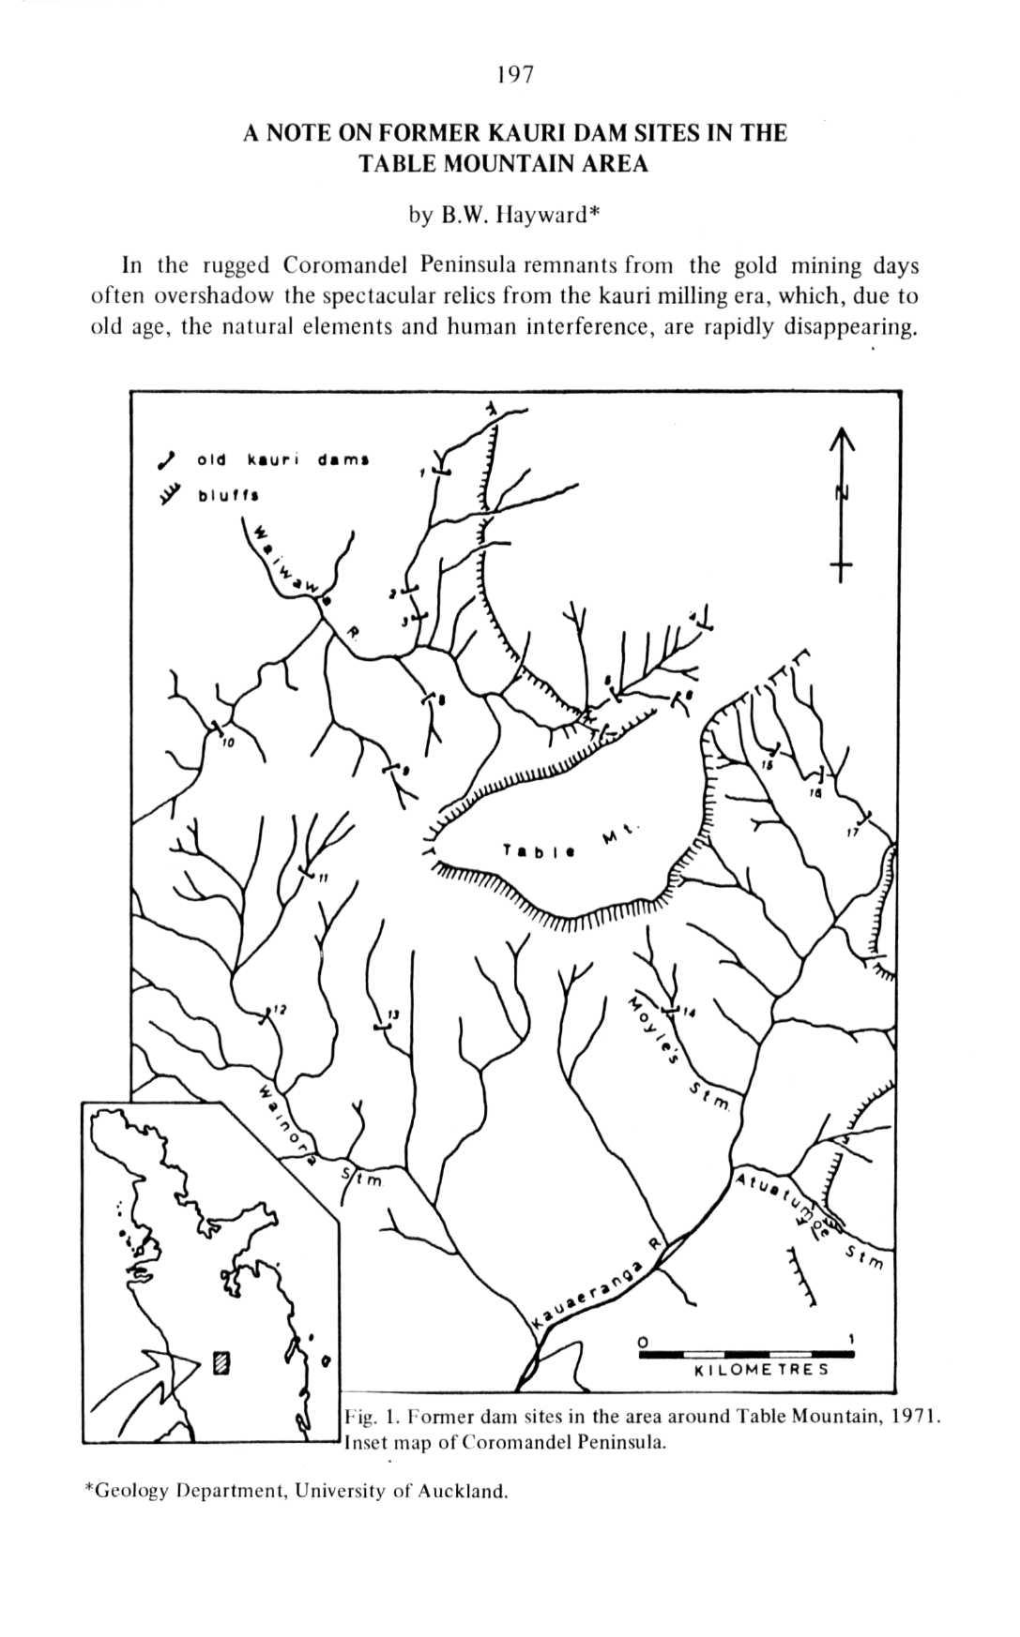 A Note on Former Kauri Dam Sites in the Table Mountain Area, by B. W